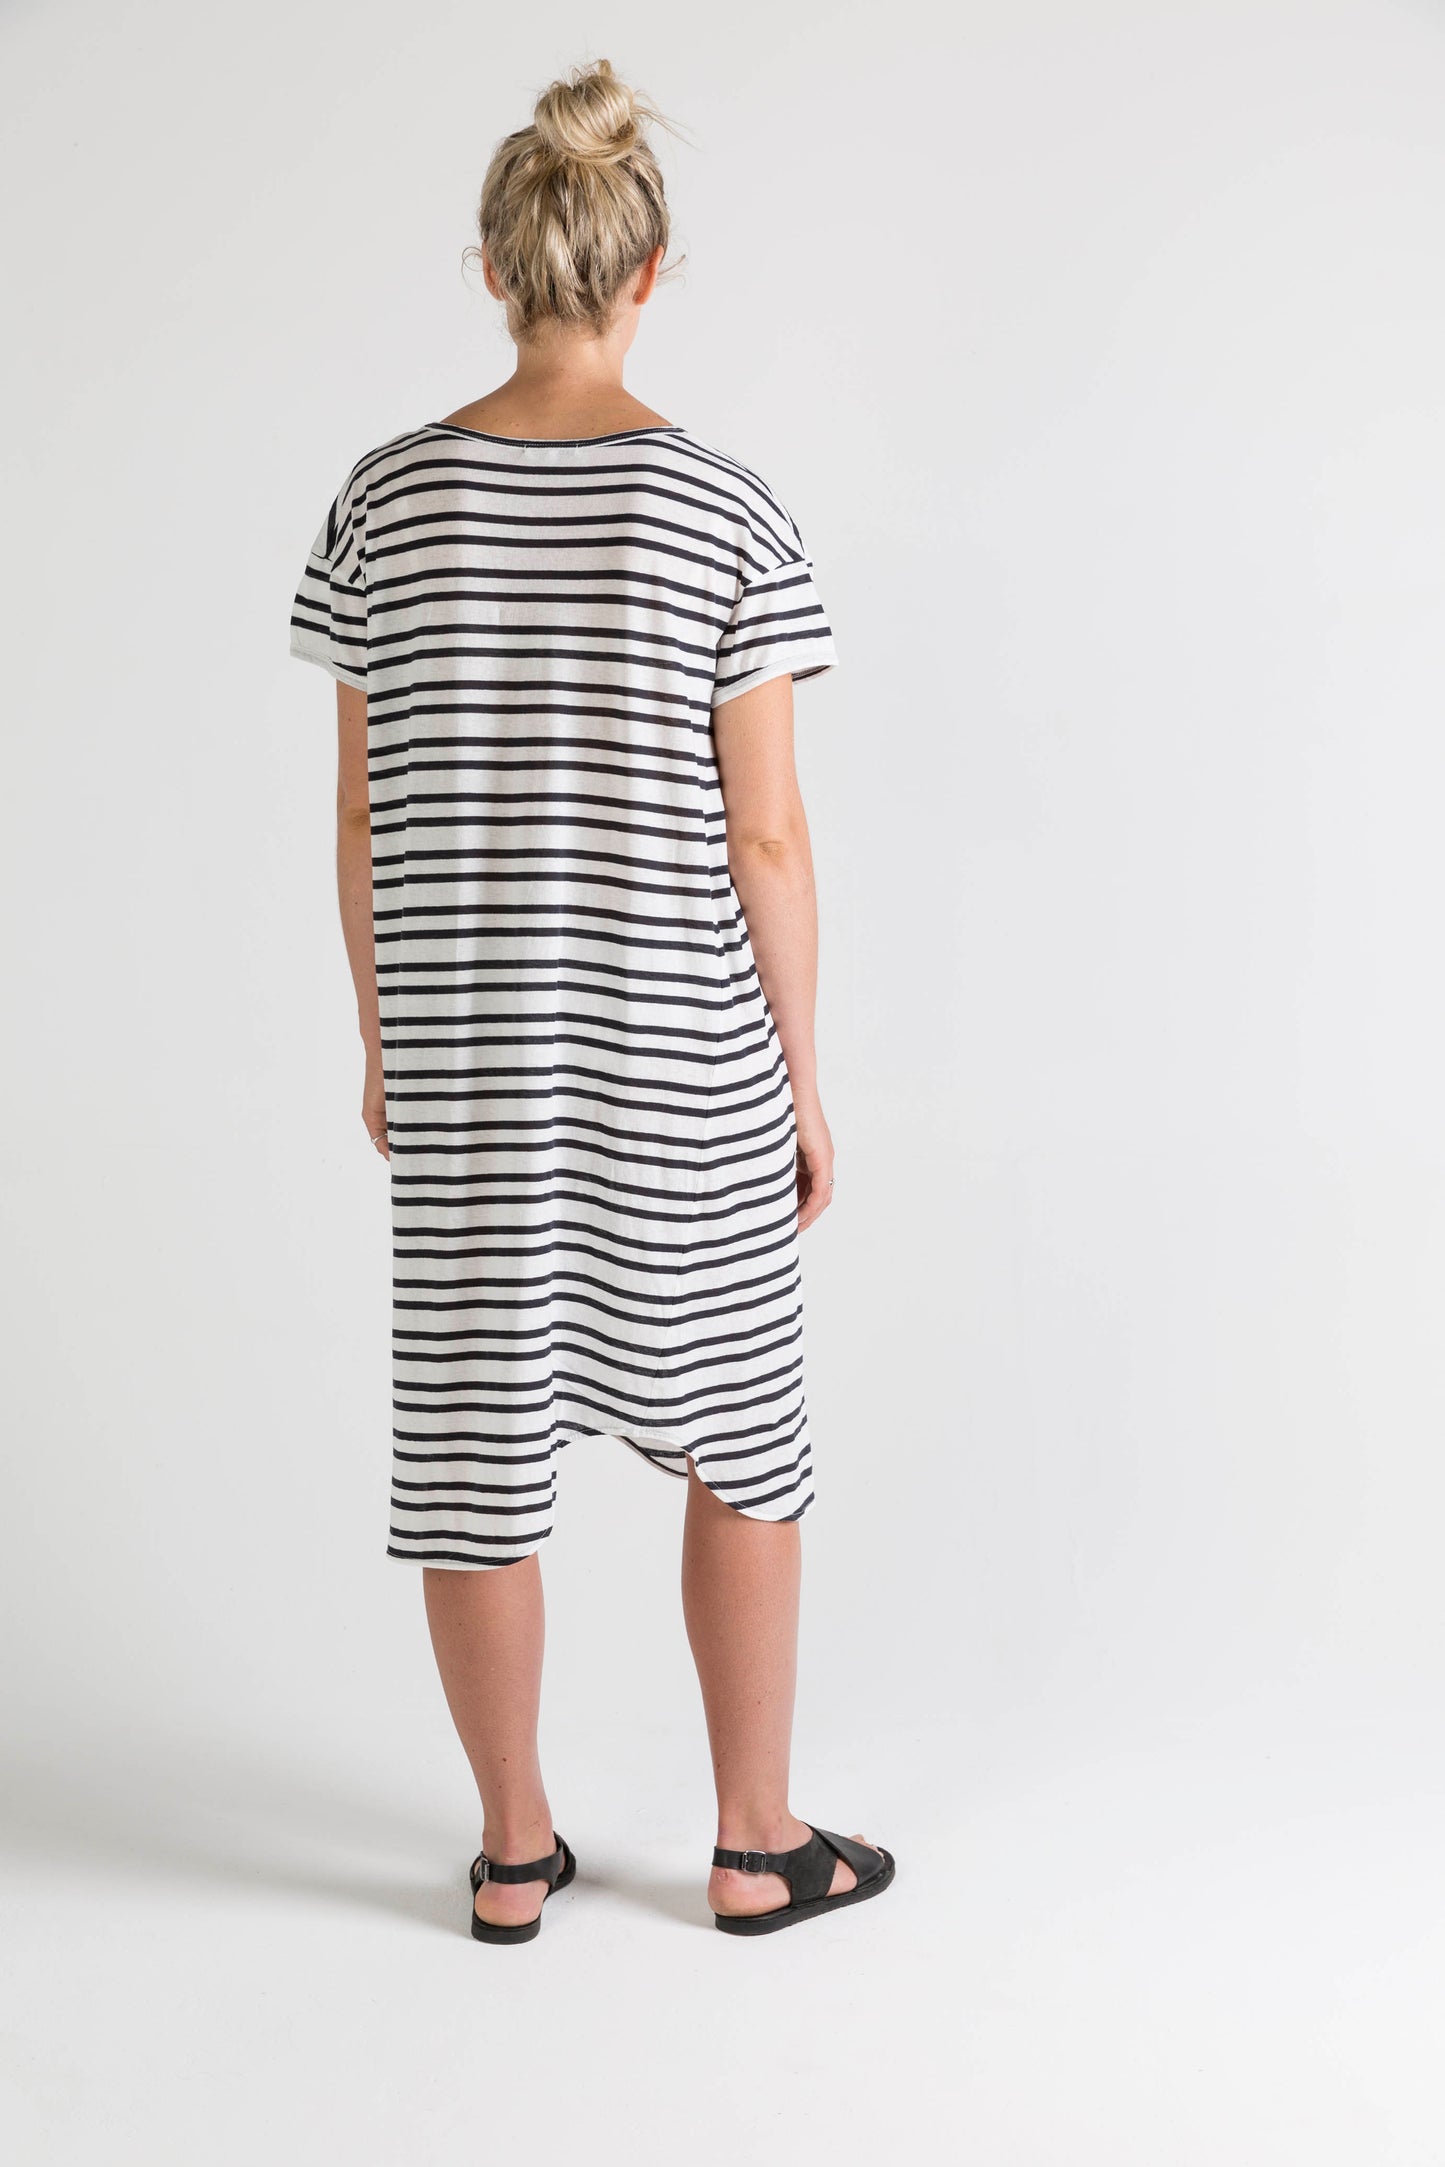 Ophelia and Ryder Scoop Neck Dress